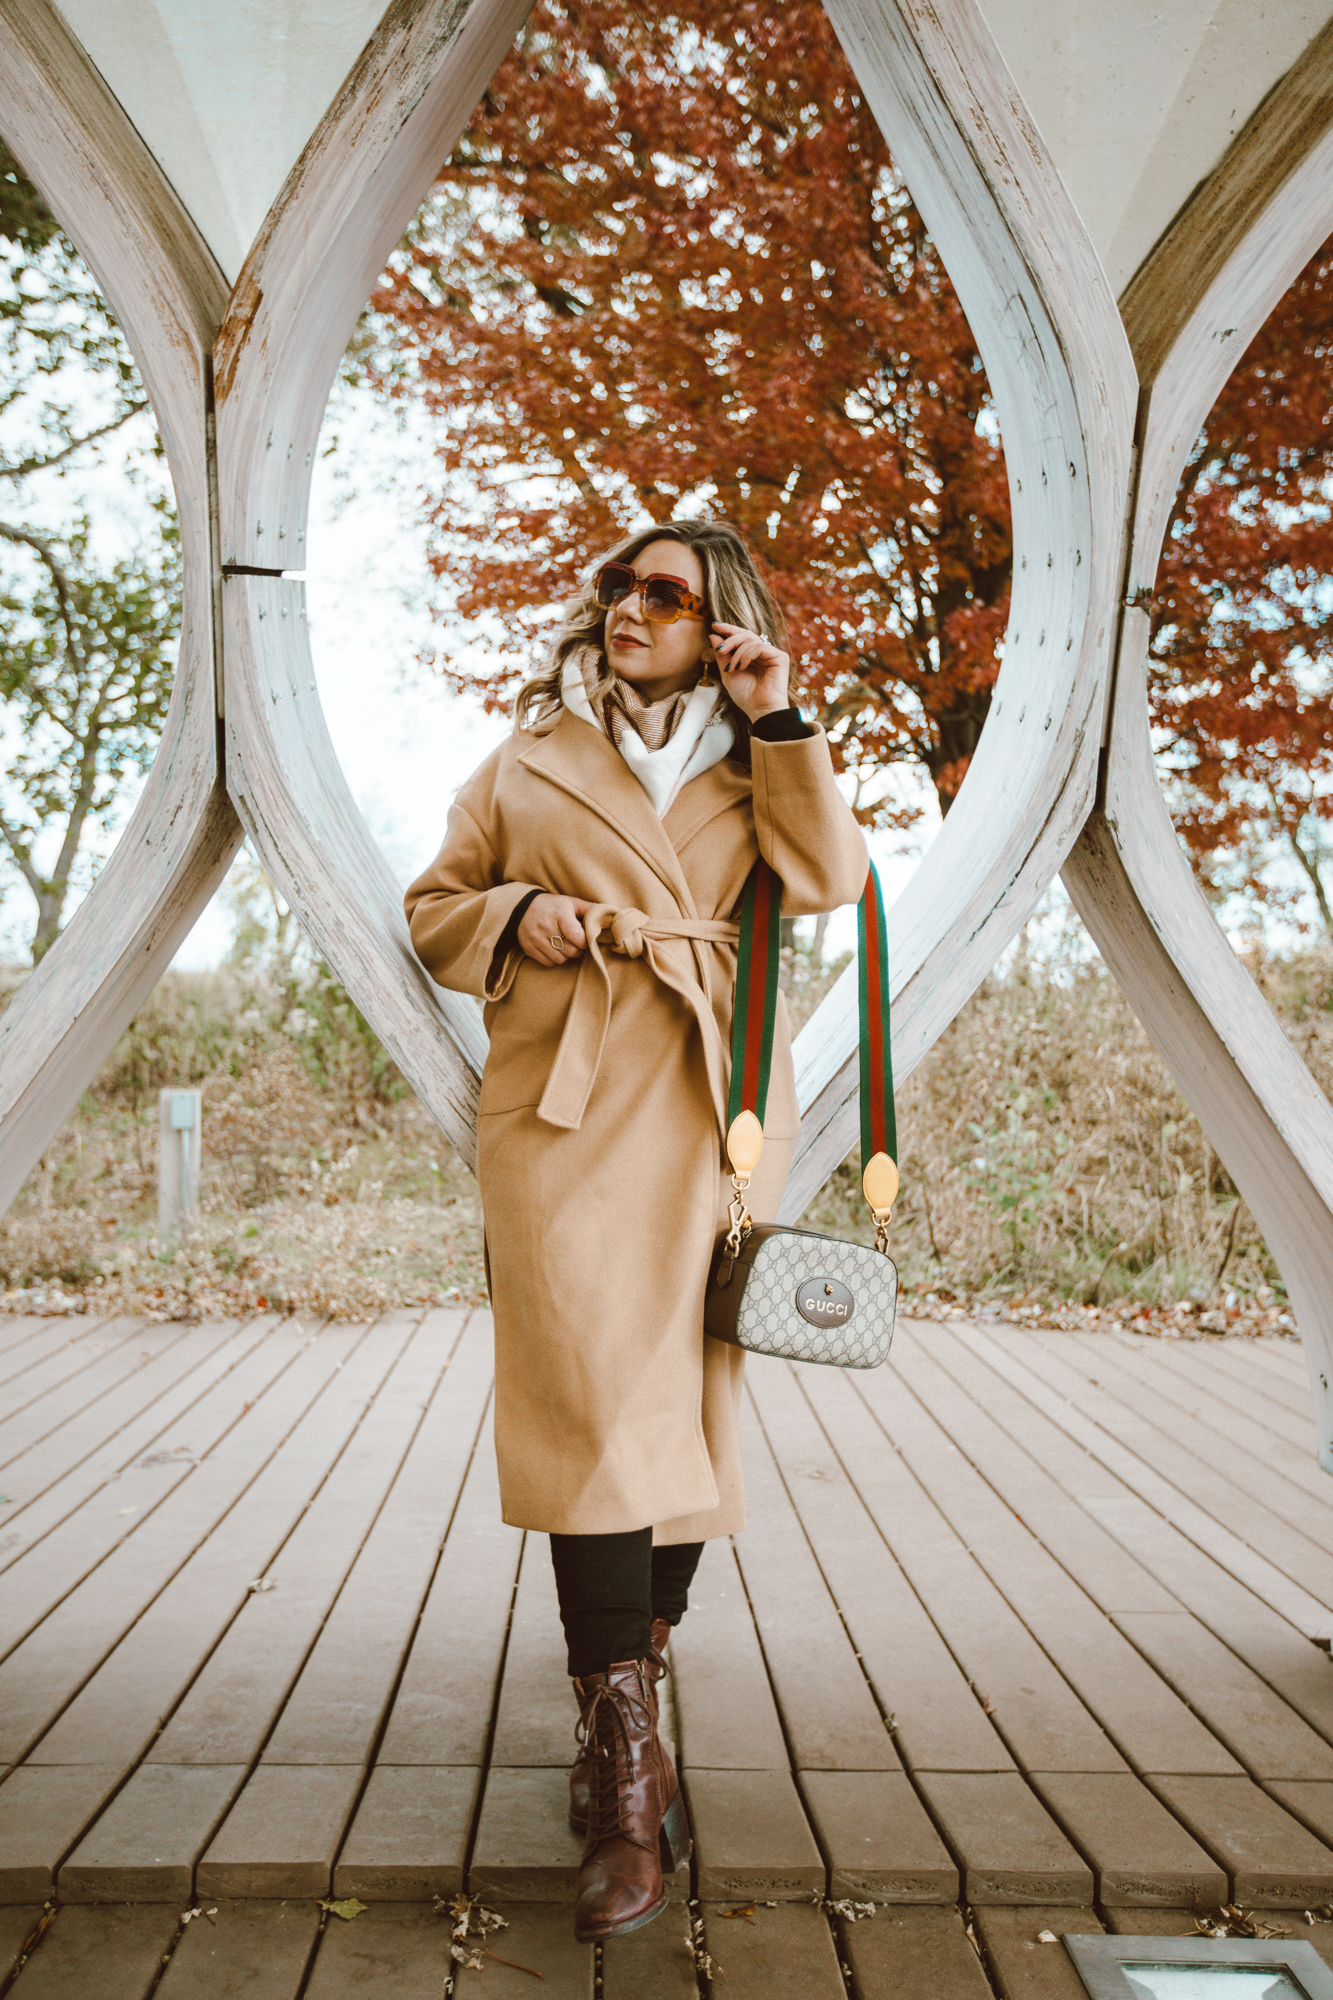 Cyber Monday Shein Sale by popular Chicago fashion blog, Glass of Glam: image of a woman outside wearing a Shein Notched Collar Split Hem Belted Coat, Macy's Patricia Nash Sicily Booties, Ann Taylor Petite Sculpting Pockets High Rise Skinny Jeans In Jet Black Wash, scarf and holding a Gucci GG Supreme messenger bag.